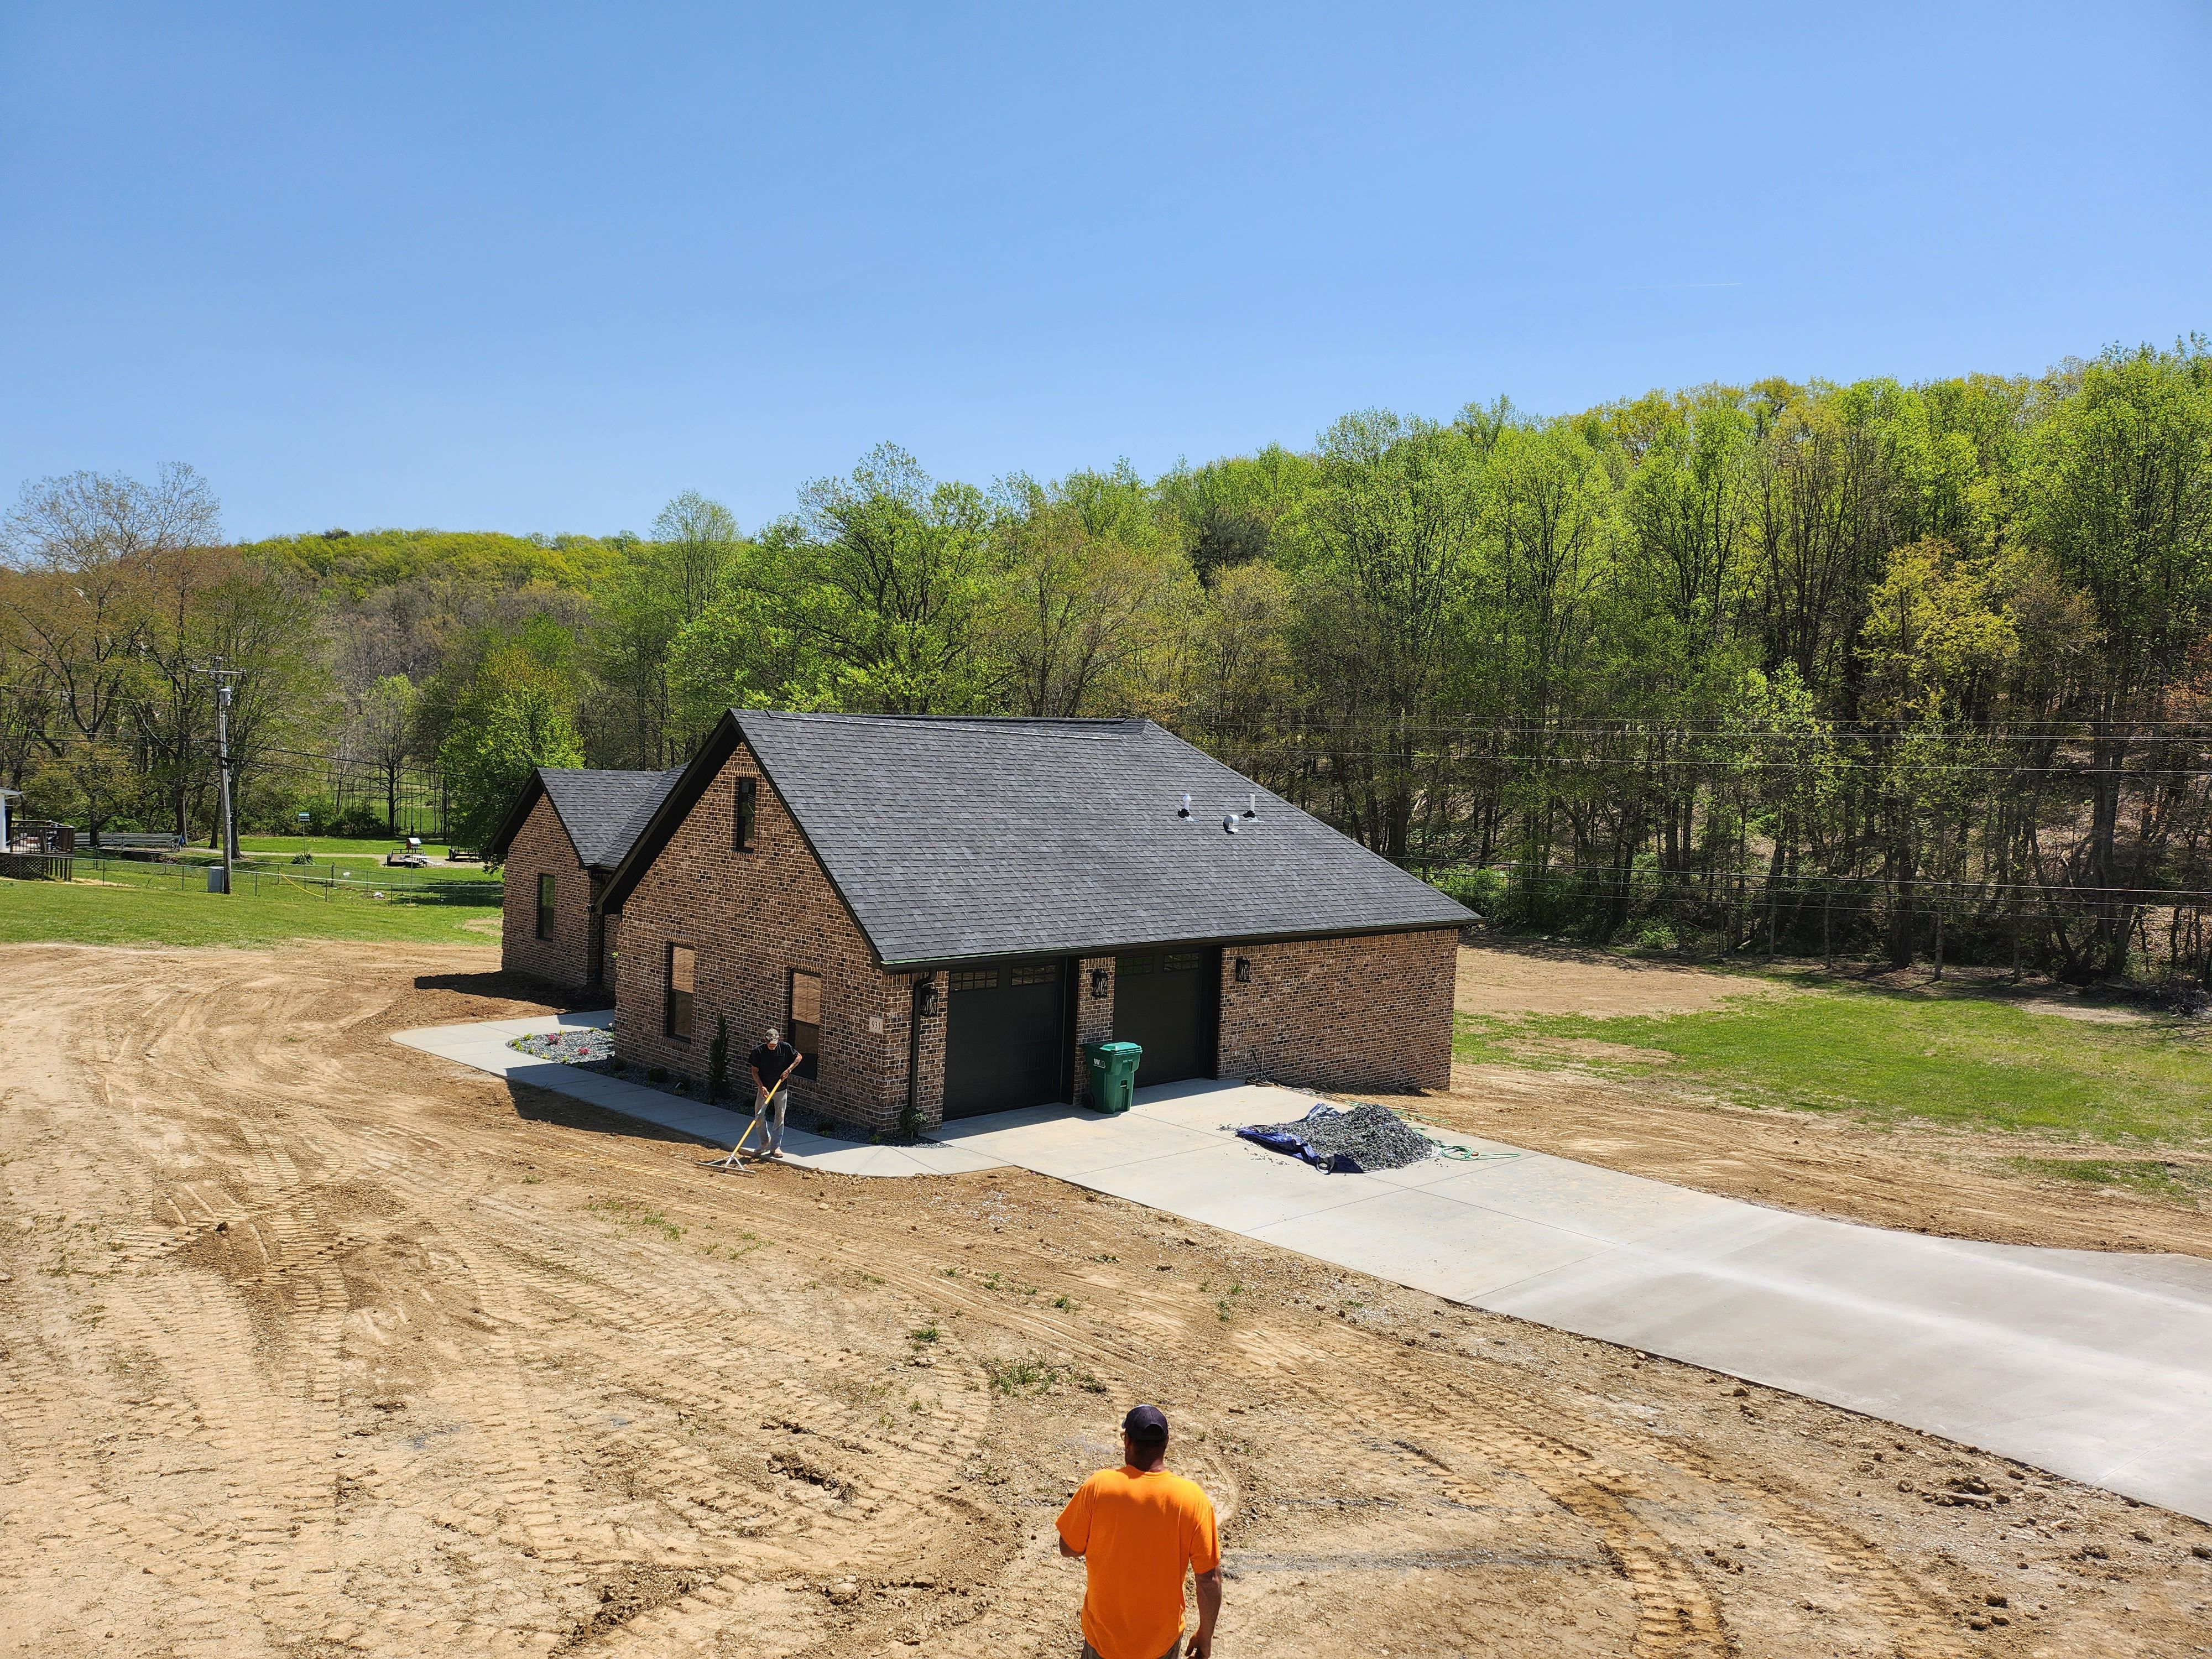 All Photos for Hellards Excavation and Concrete Services LLC in Mount Vernon, KY